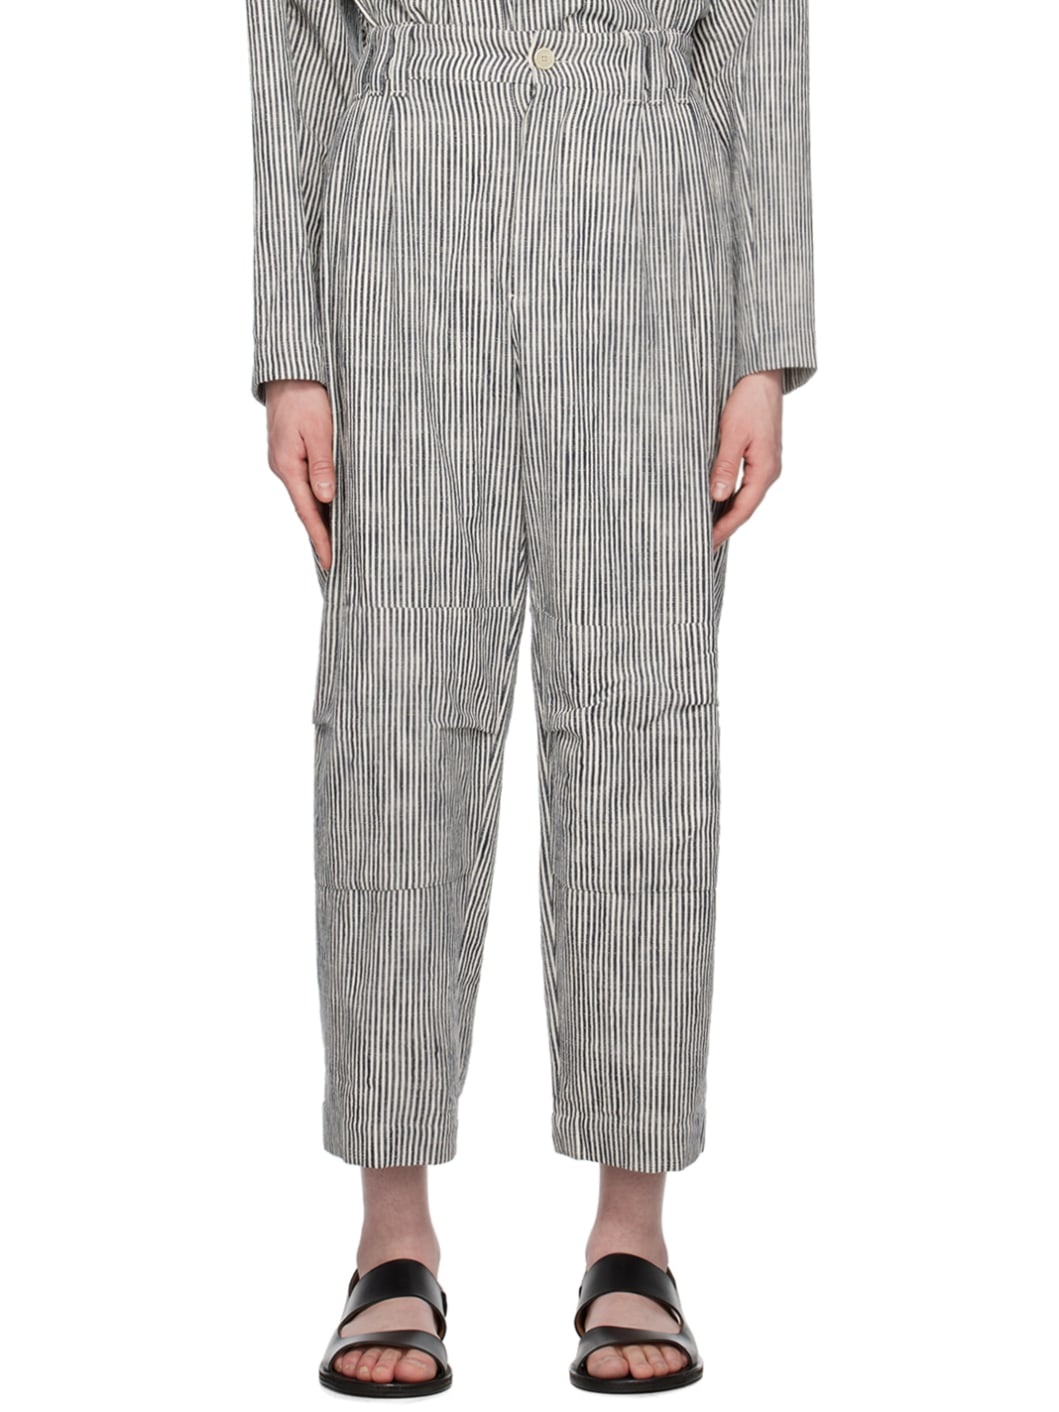 Navy & OFf-White 'The Fisherman' Trousers - 1